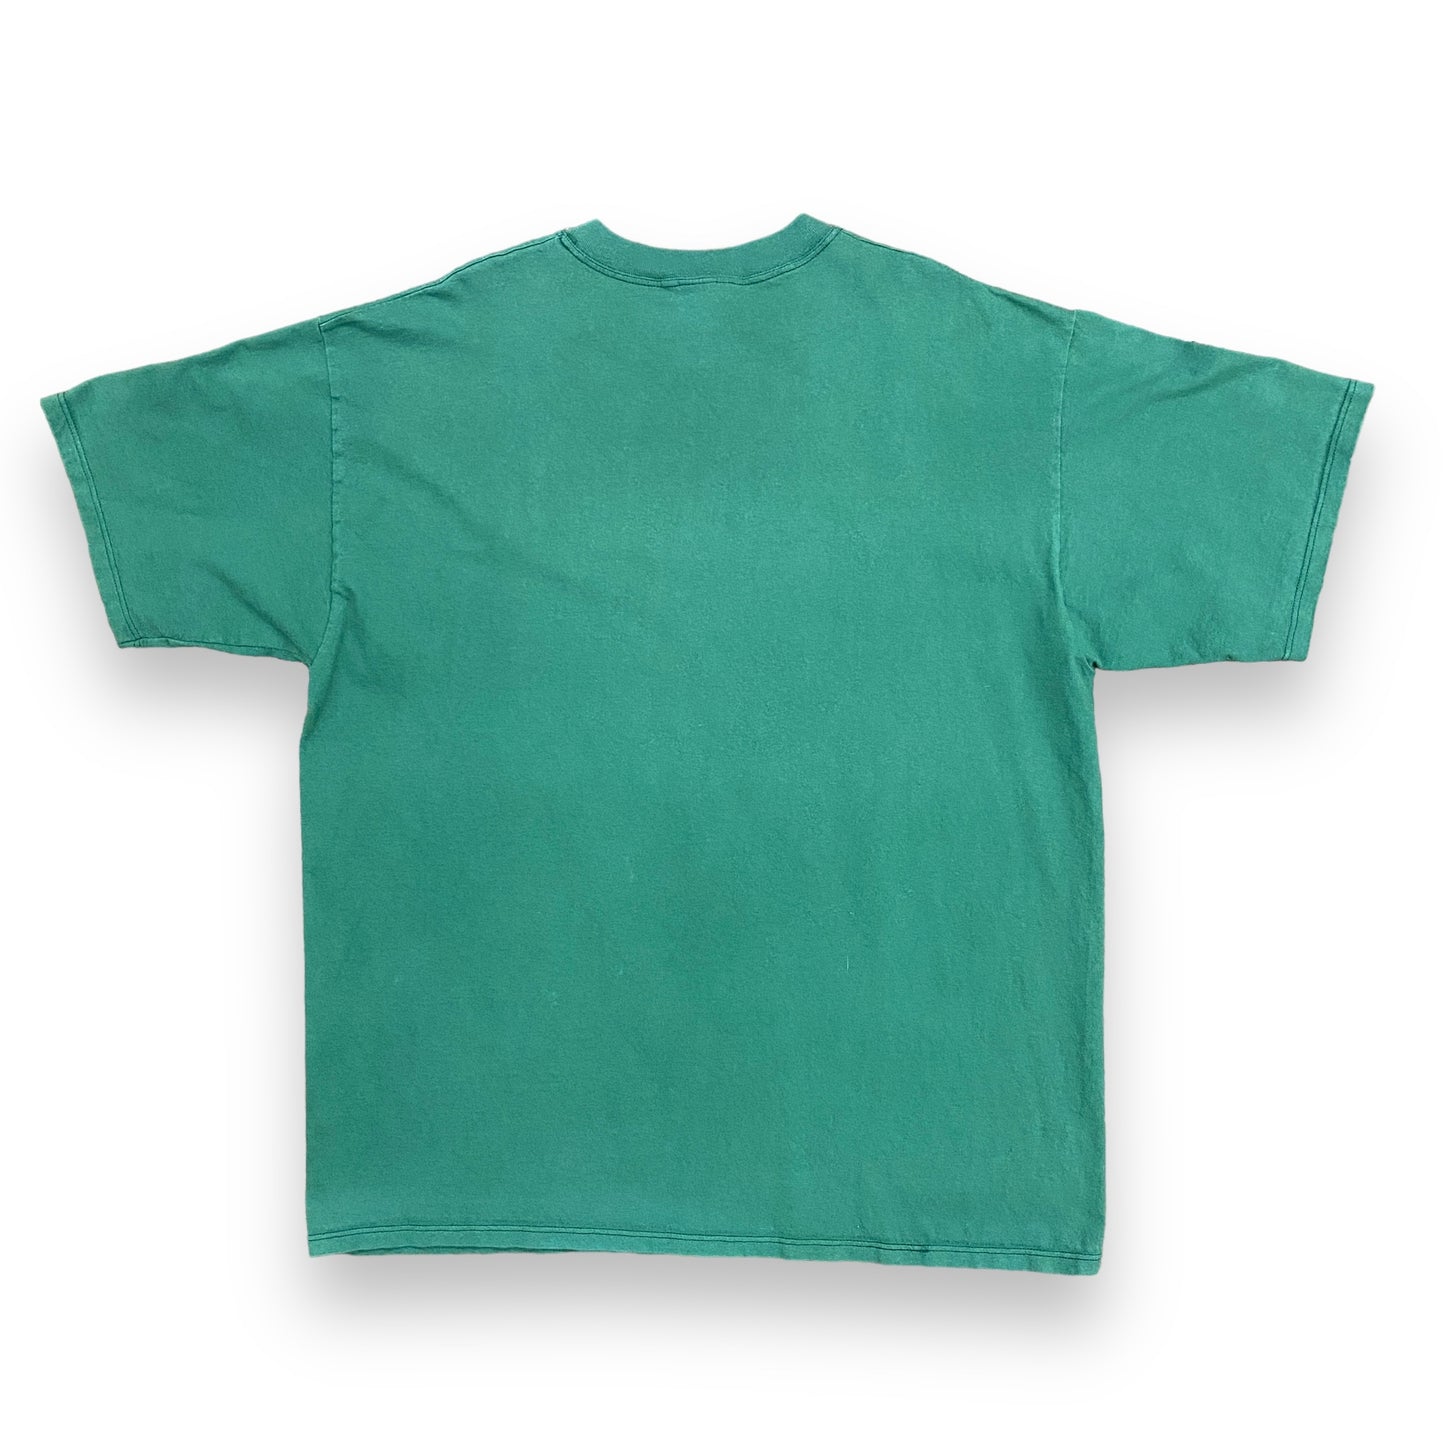 1990s Russell Athletic Green Logo Tee - Size XXL